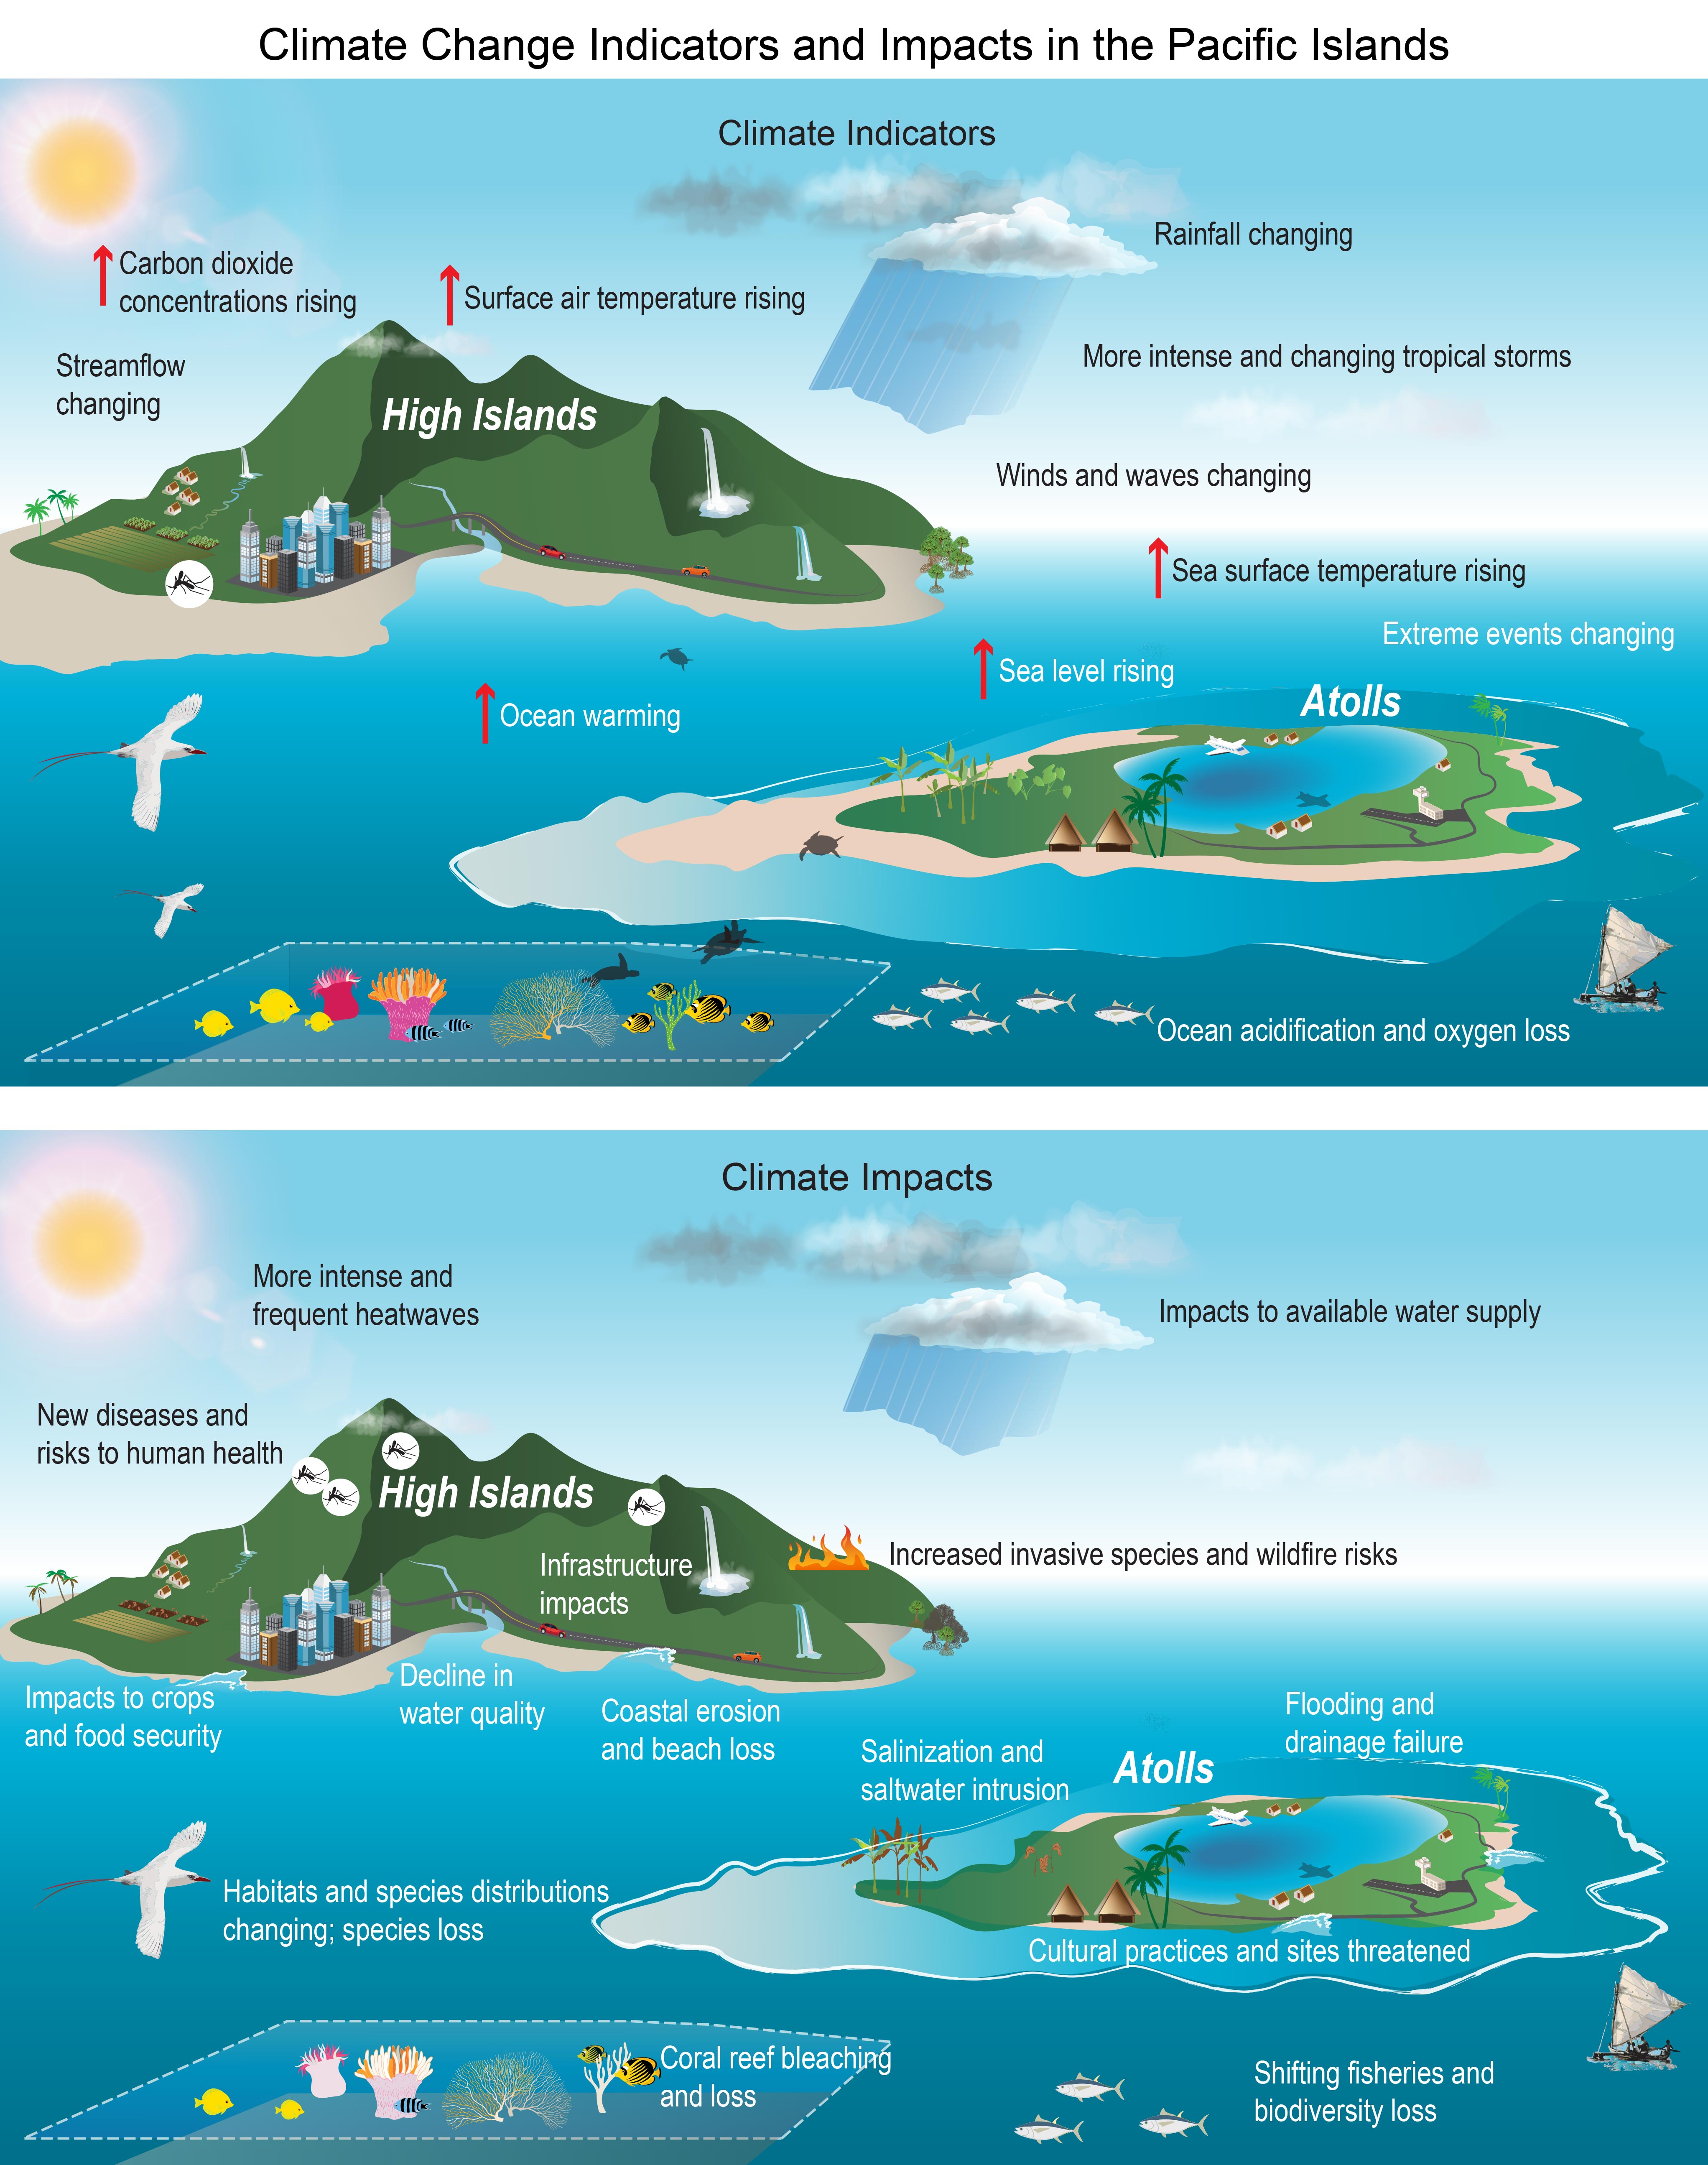 Climate Change Indicators and Impacts in the Pacific Islands